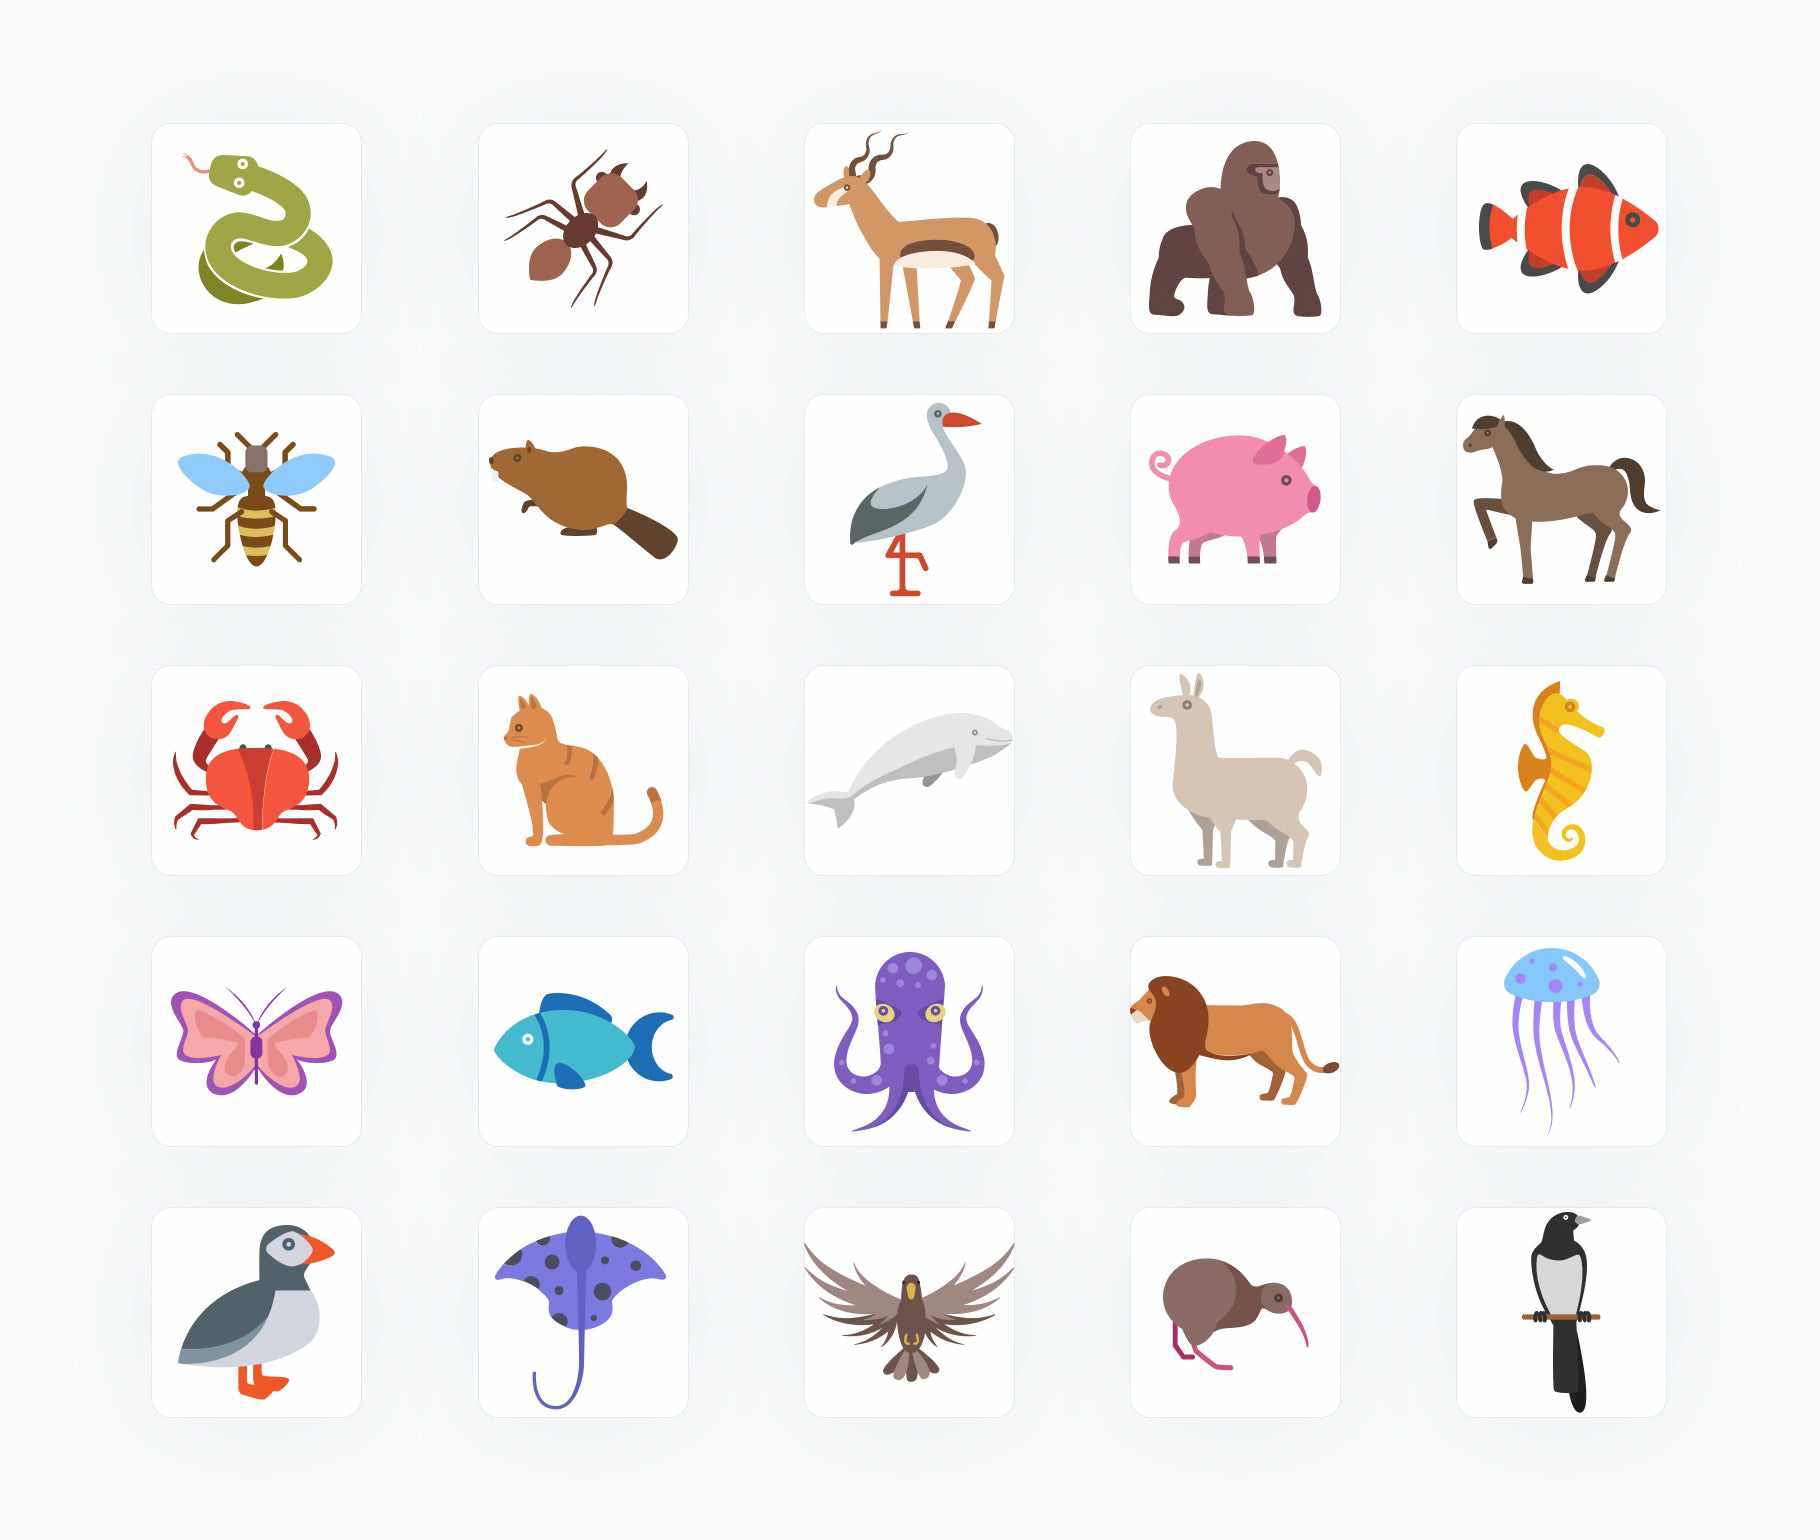 Animals-Flat -Vector-Icons Icons Animals Flat Vector Icons S12132104 powerpoint-template keynote-template google-slides-template infographic-template